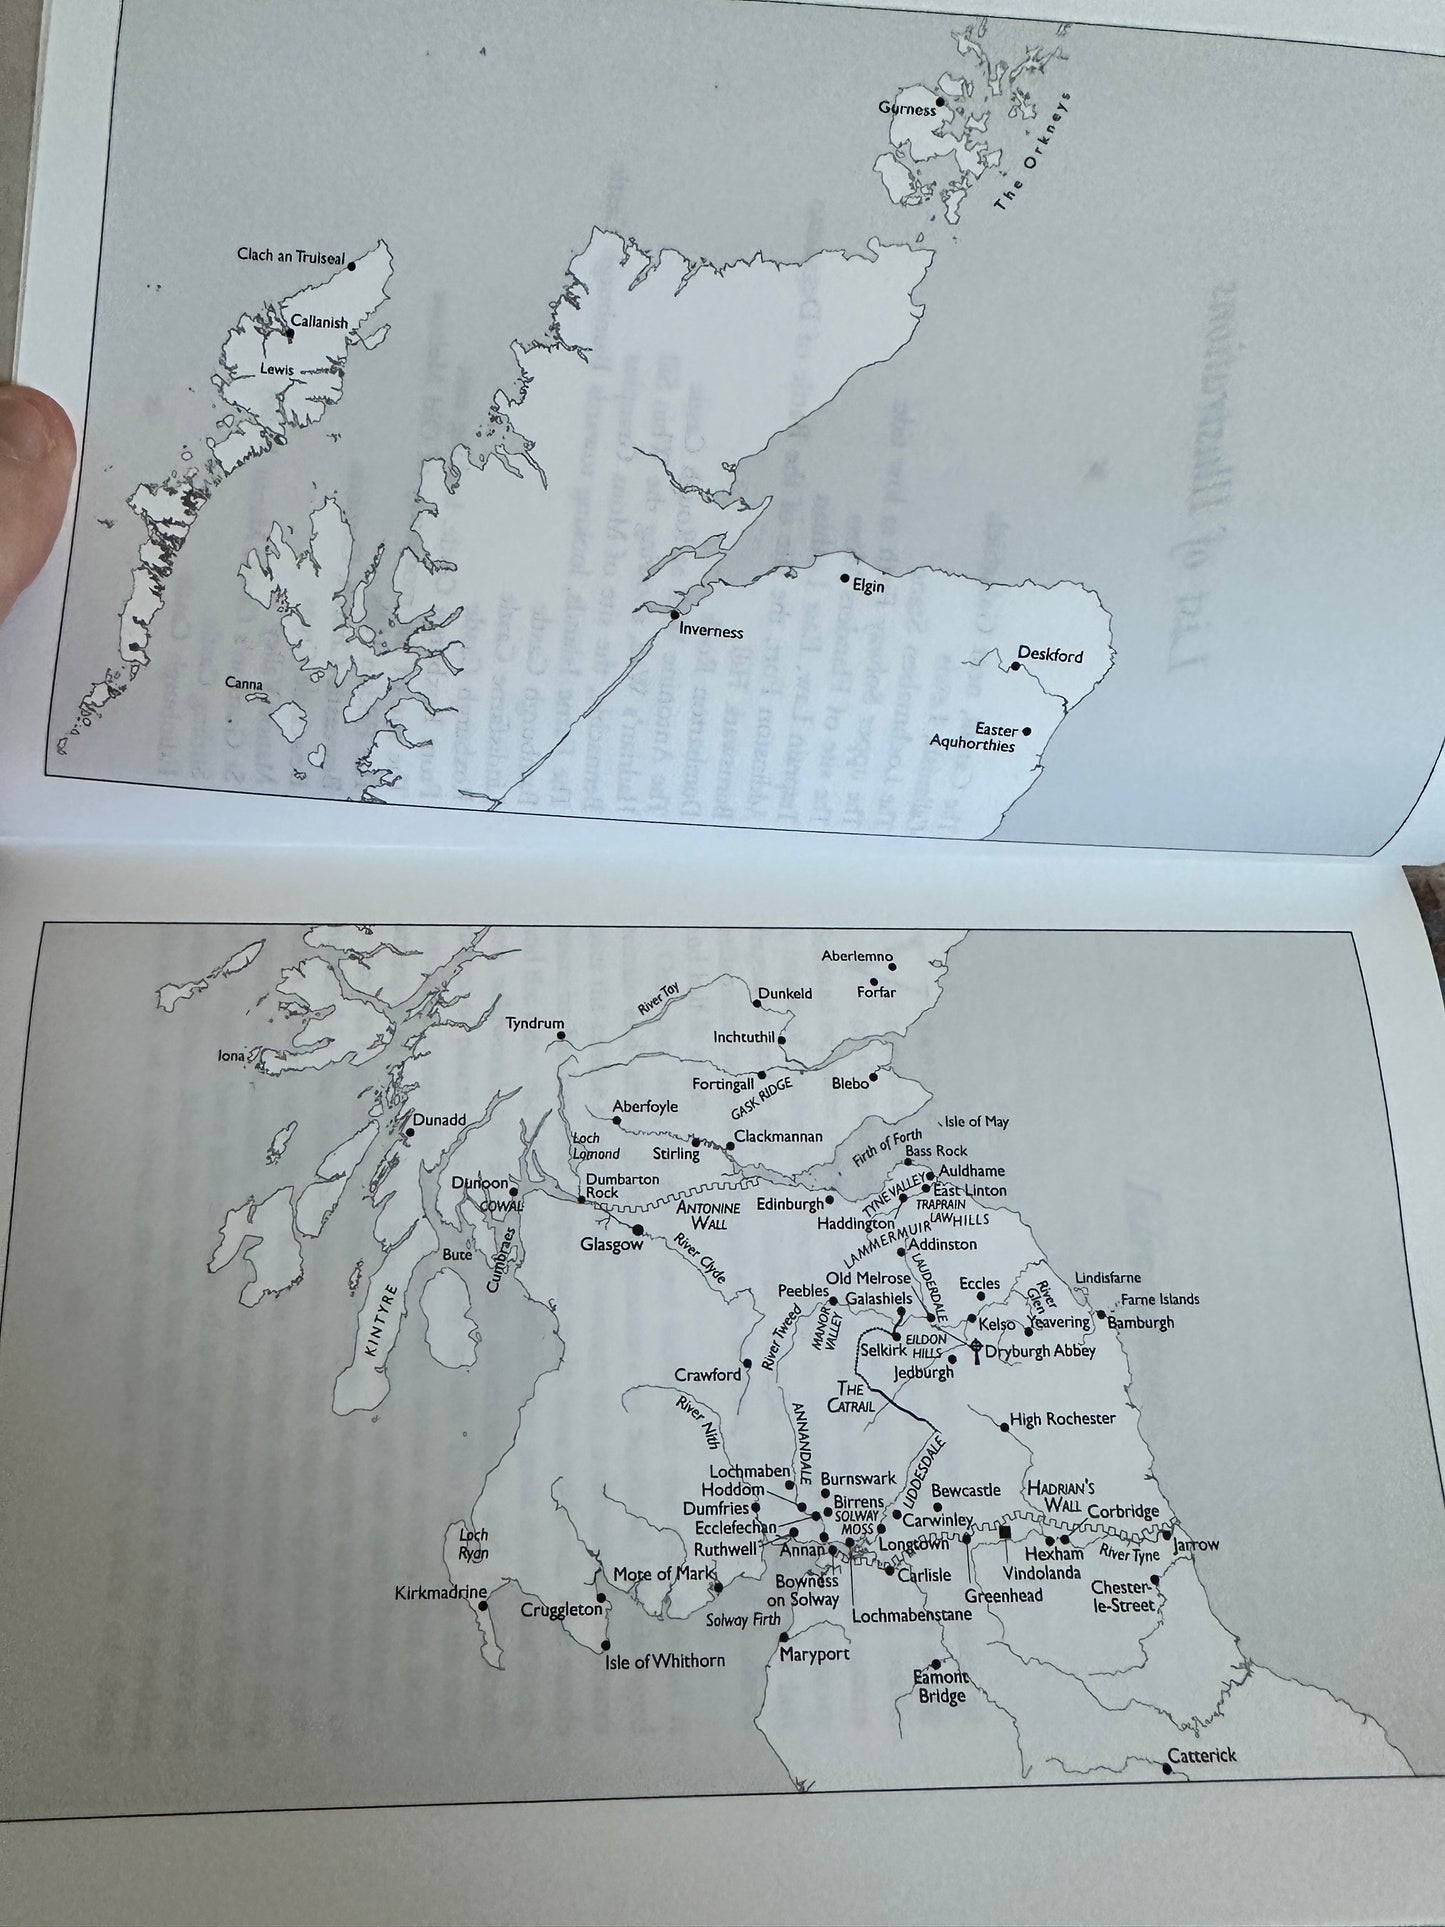 2010*1st Signed* The Faded Map: The Lost Kingdoms of Scotland - Alistair Moffat(Birlinn Publishers)